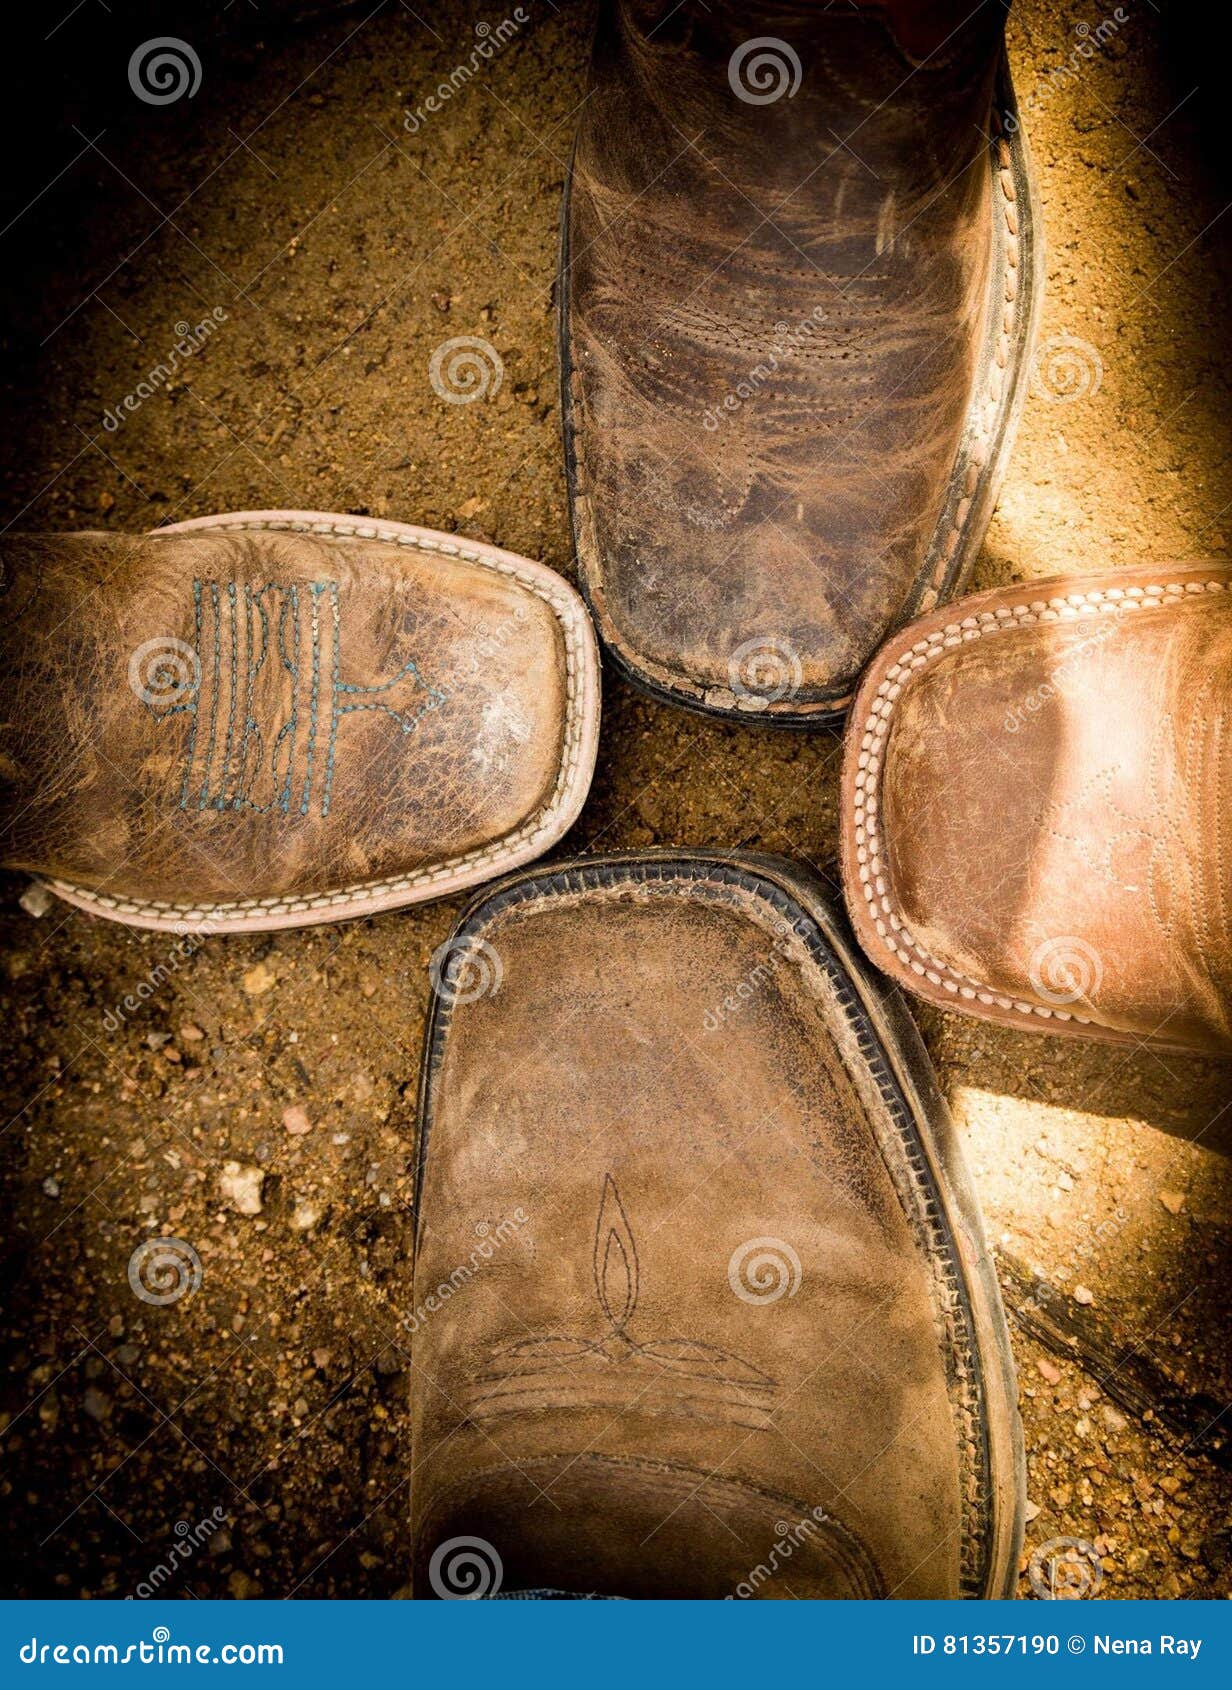 Family boots stock photo. Image of boots, cowgirl, together - 81357190